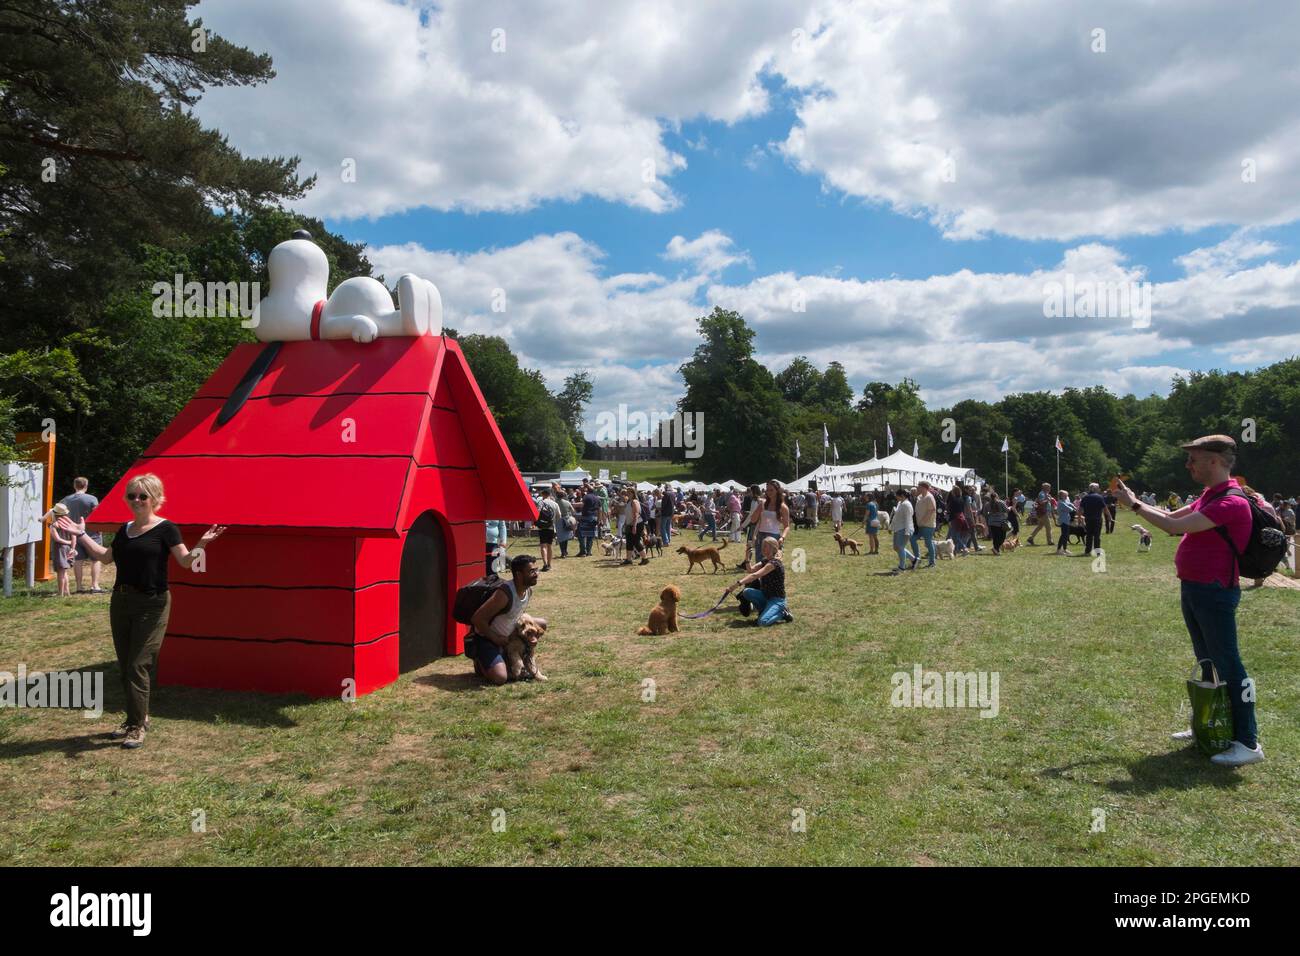 People taking selfies with their dogs standing in front of a massive red kennel with Snoopy lying on top at Goodwoof, The Kennels, Goodwood,Sussex, UK Stock Photo